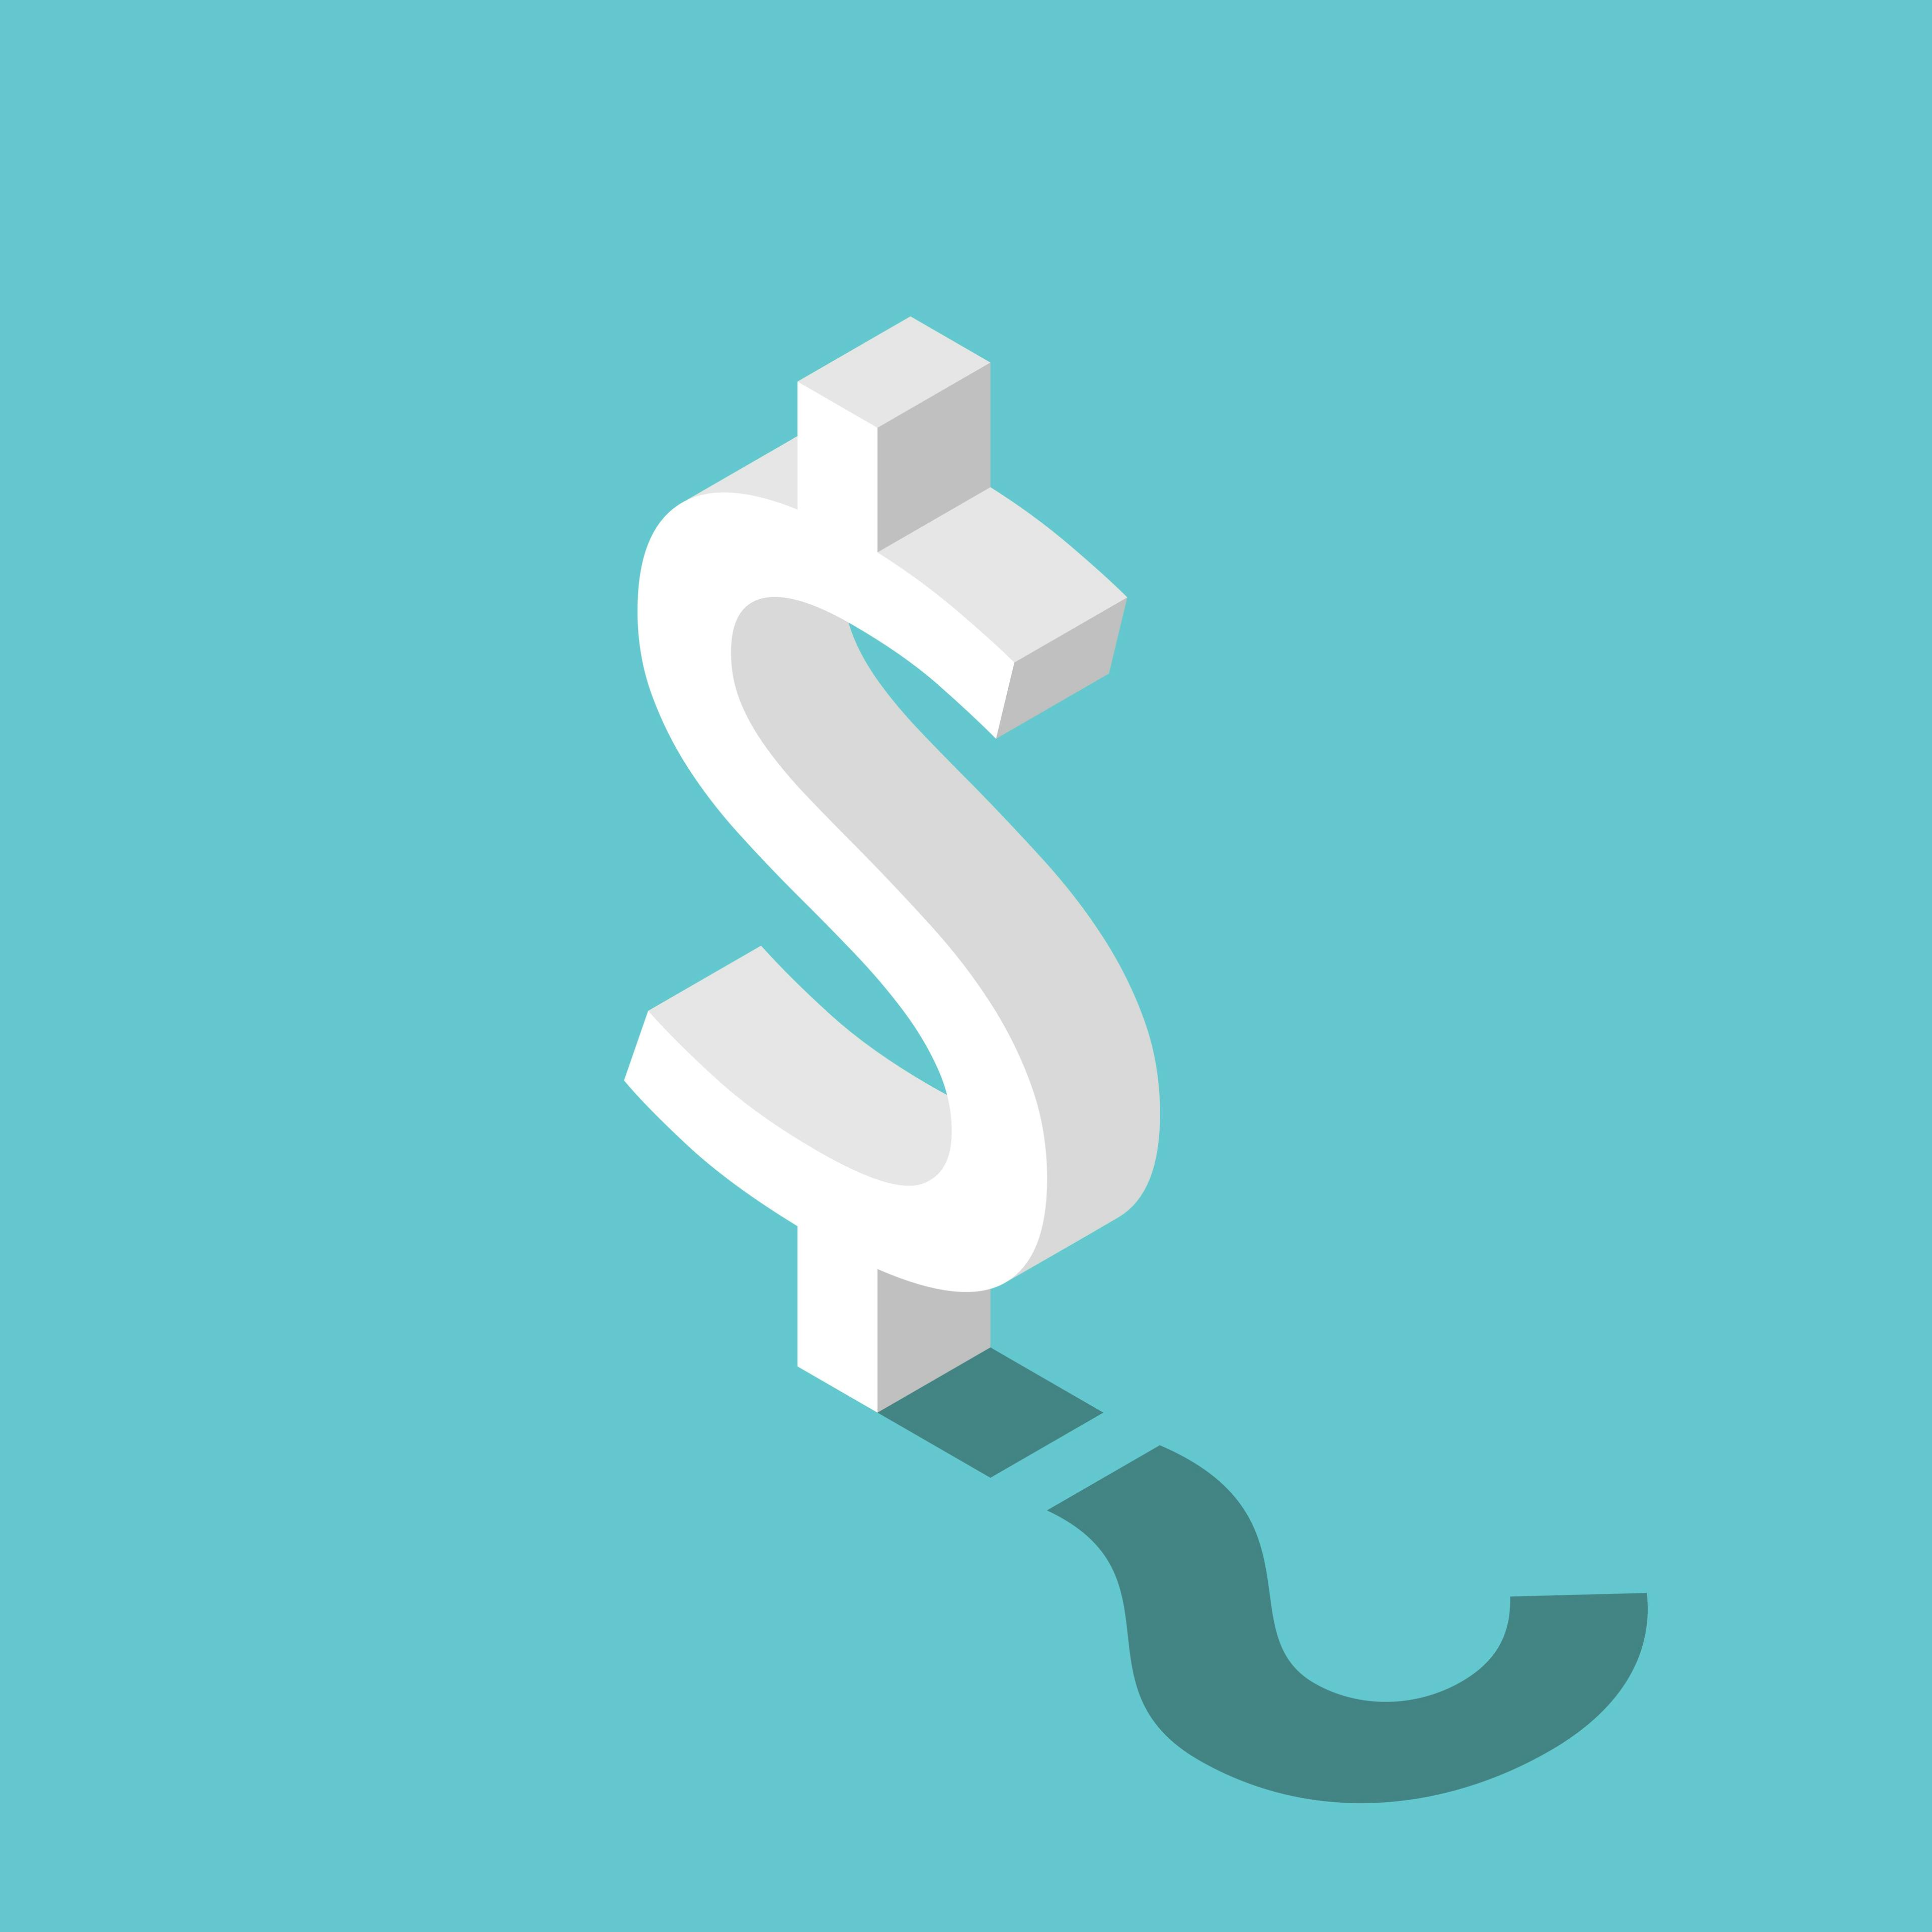 White dollar sign with a dollar sign shadow underneath on a turqoise blue background